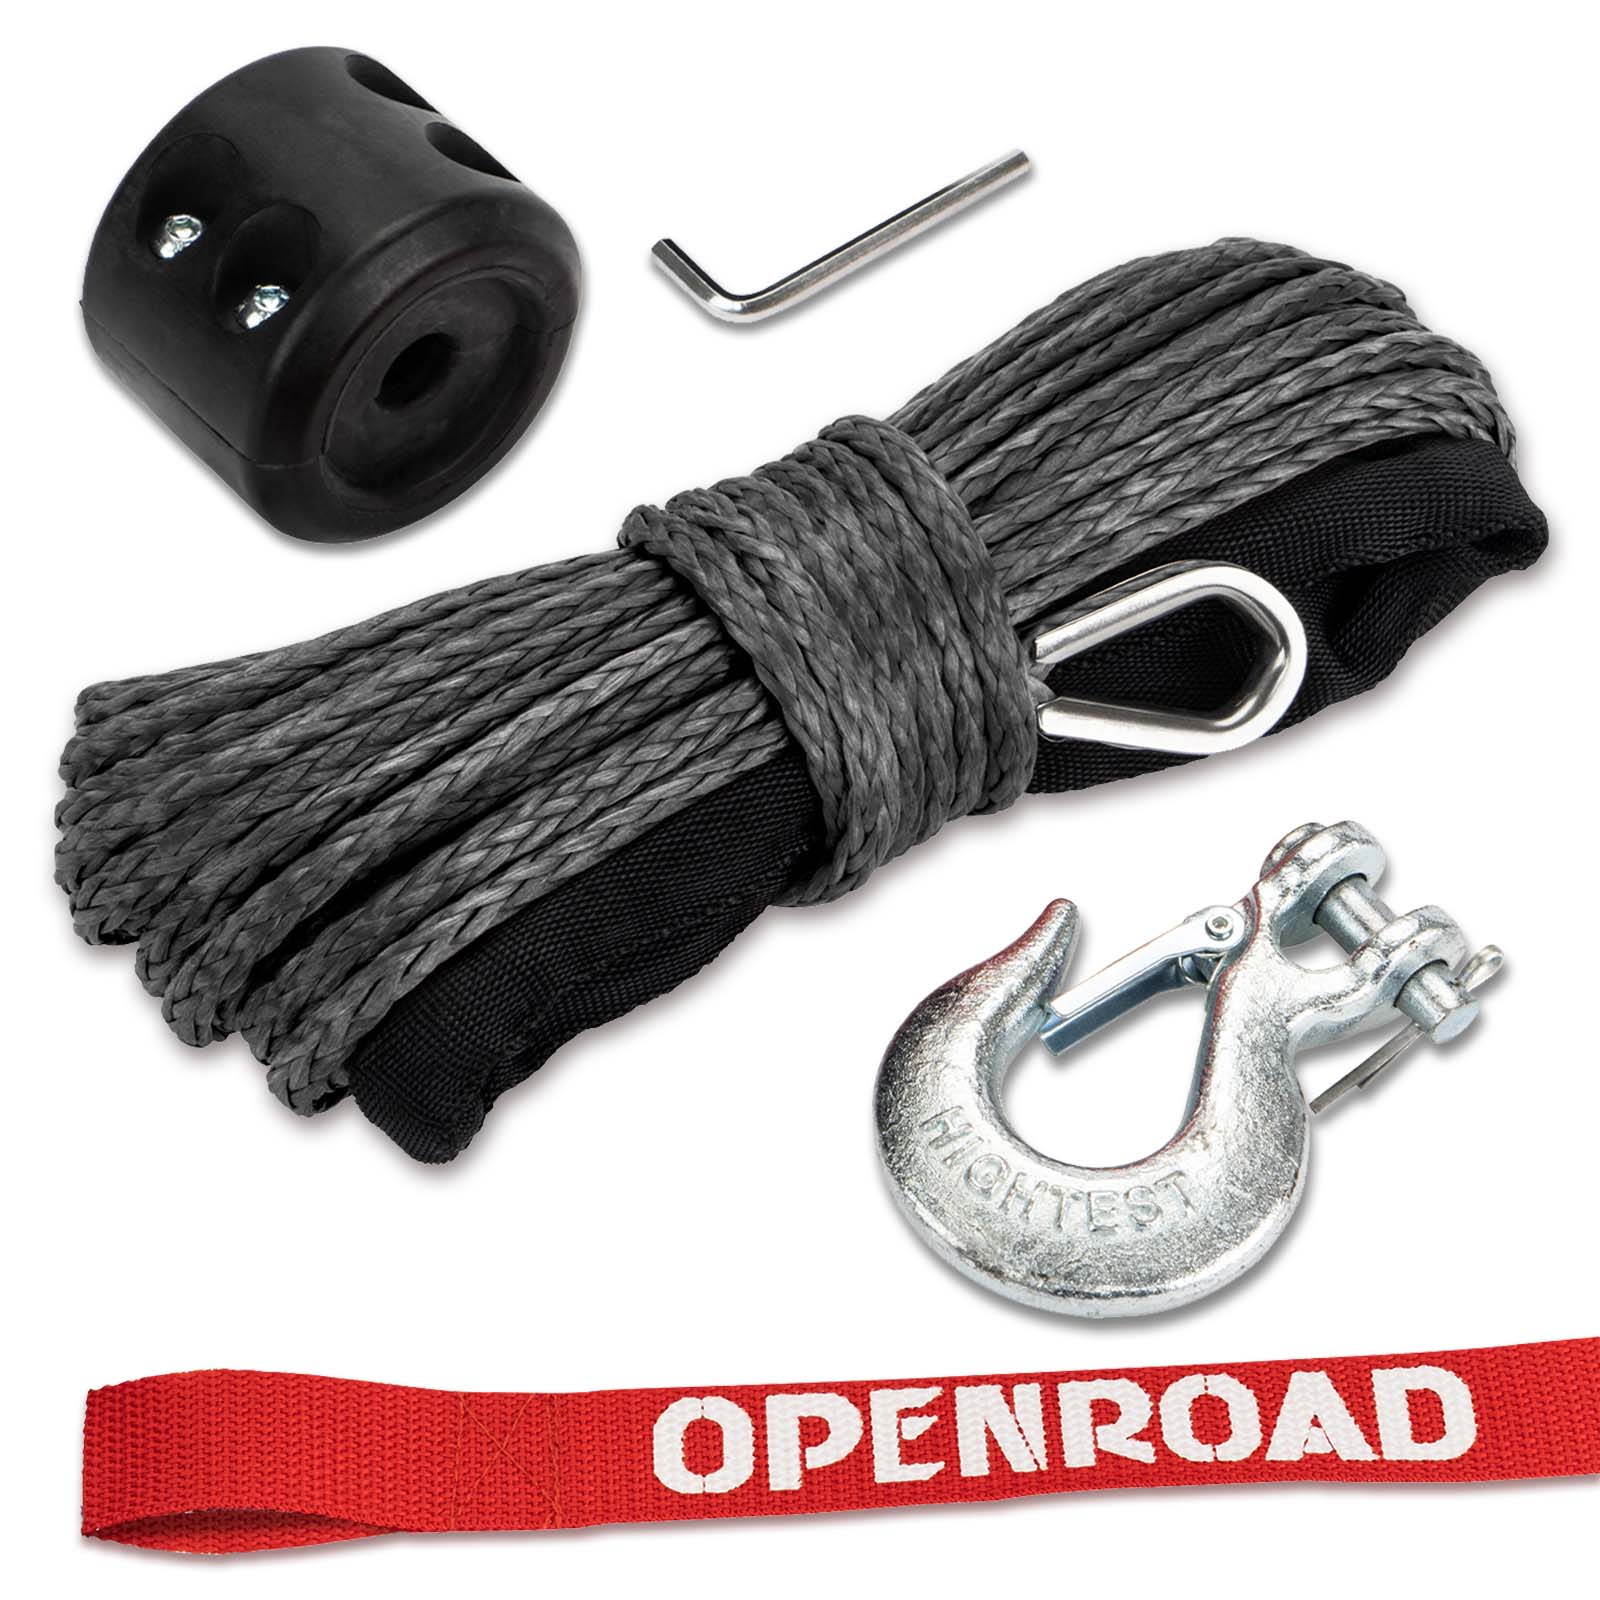 OPENROAD Synthetic Winch Rope 3/16'' x 50'Winch Rope Extension with Galvanized Removable Hook and ATV New Adjustable Rubber Blocks  openroad4wd.com Gray  